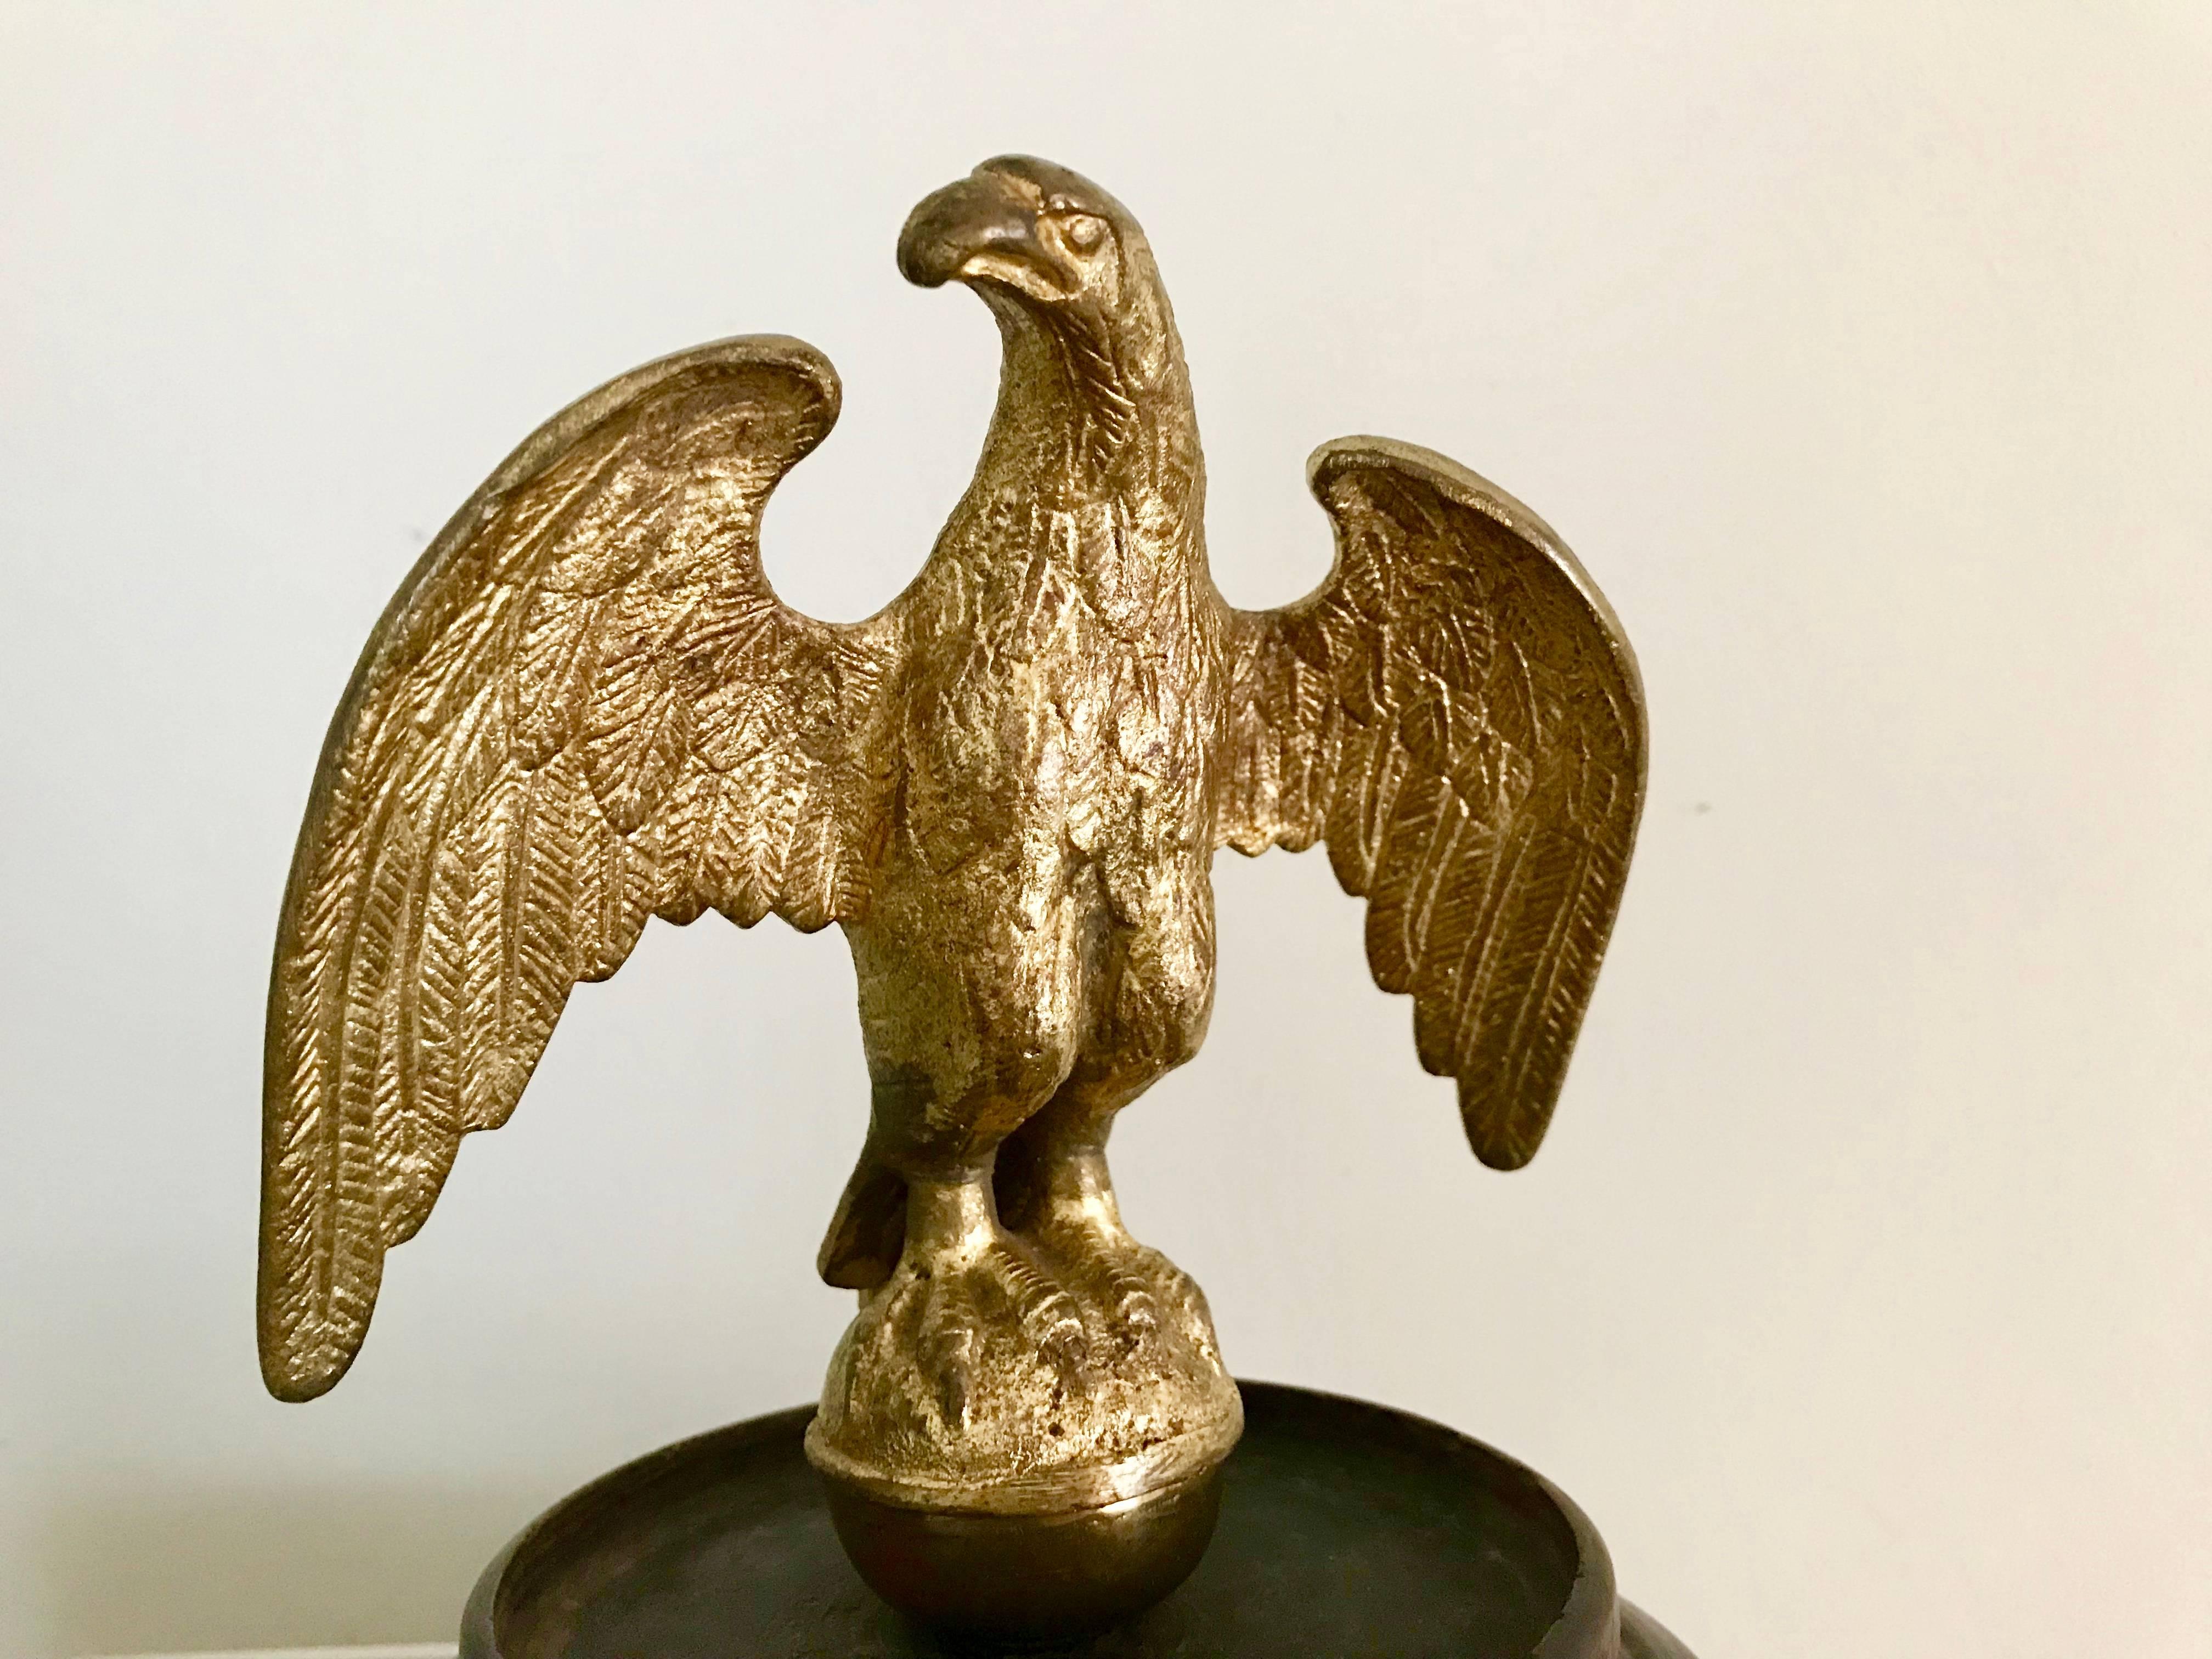 19th Century American Gilt Bronze Model of an Eagle on an Orb with Spread Wings